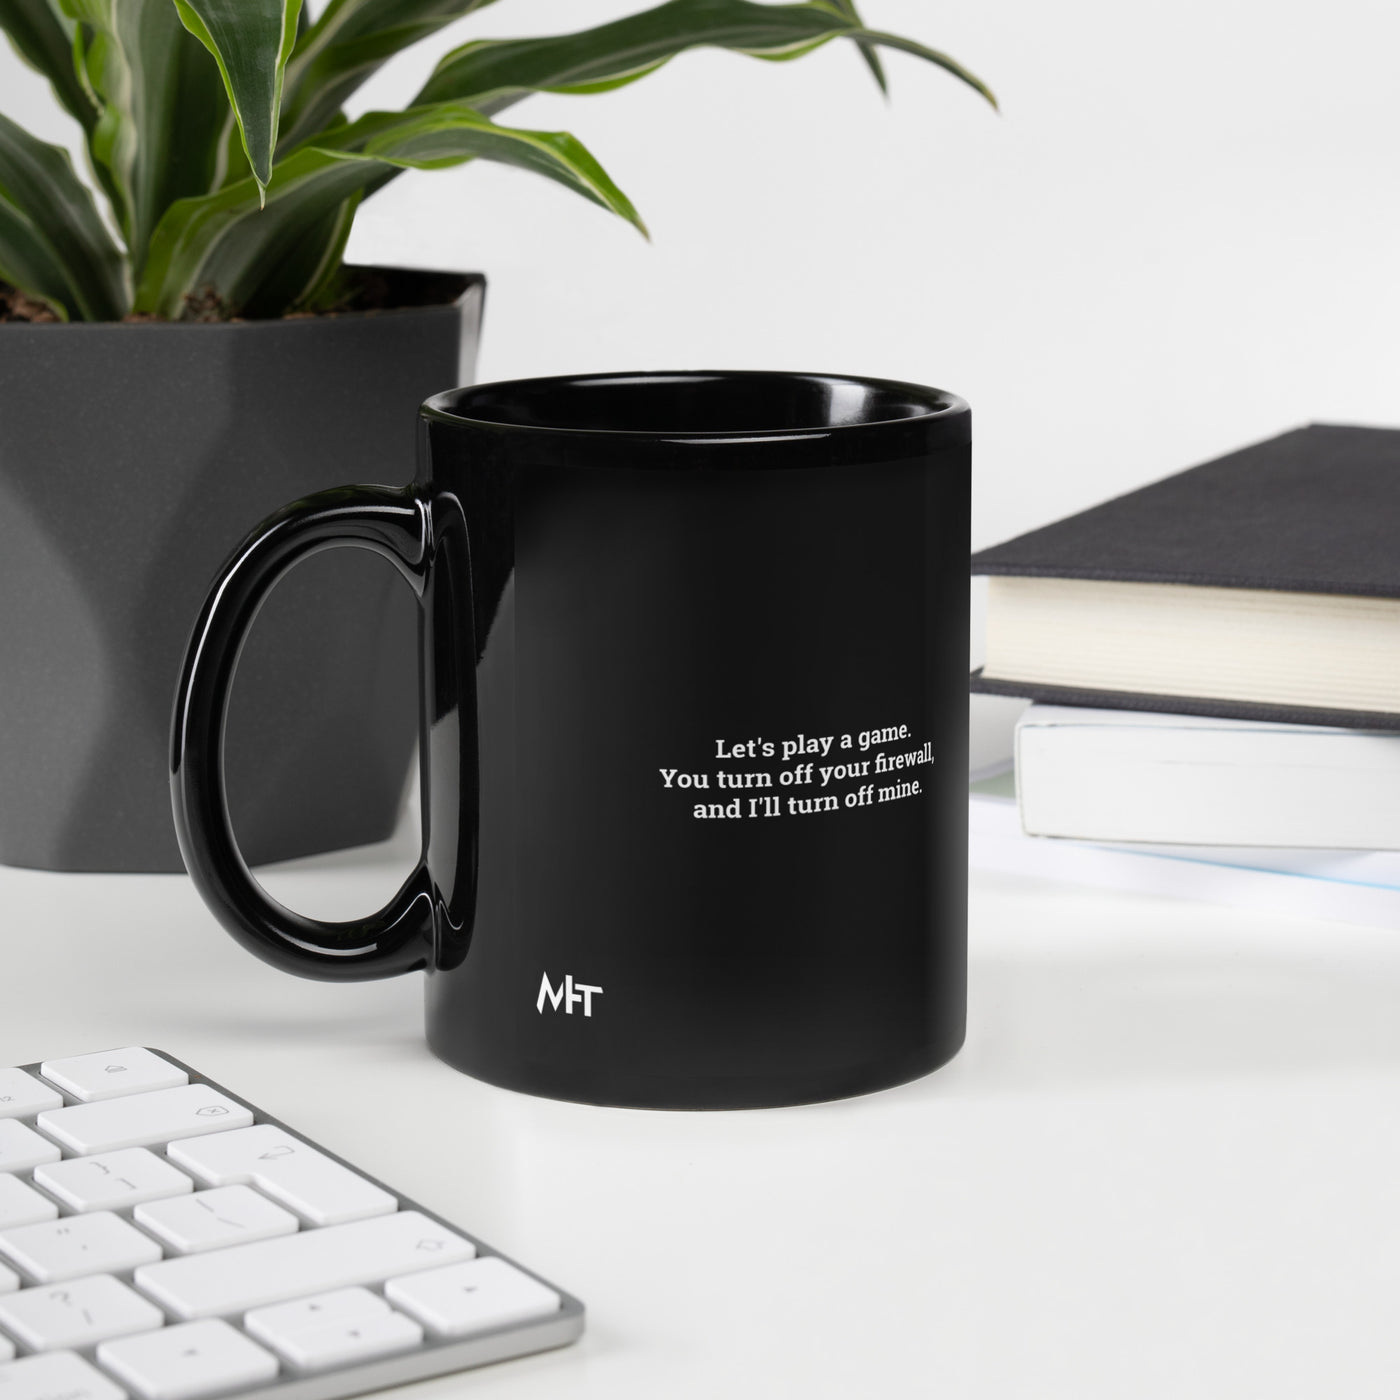 Let's Play a game: You Turn off your firewall and I'll Turn off mine V1 - Black Glossy Mug